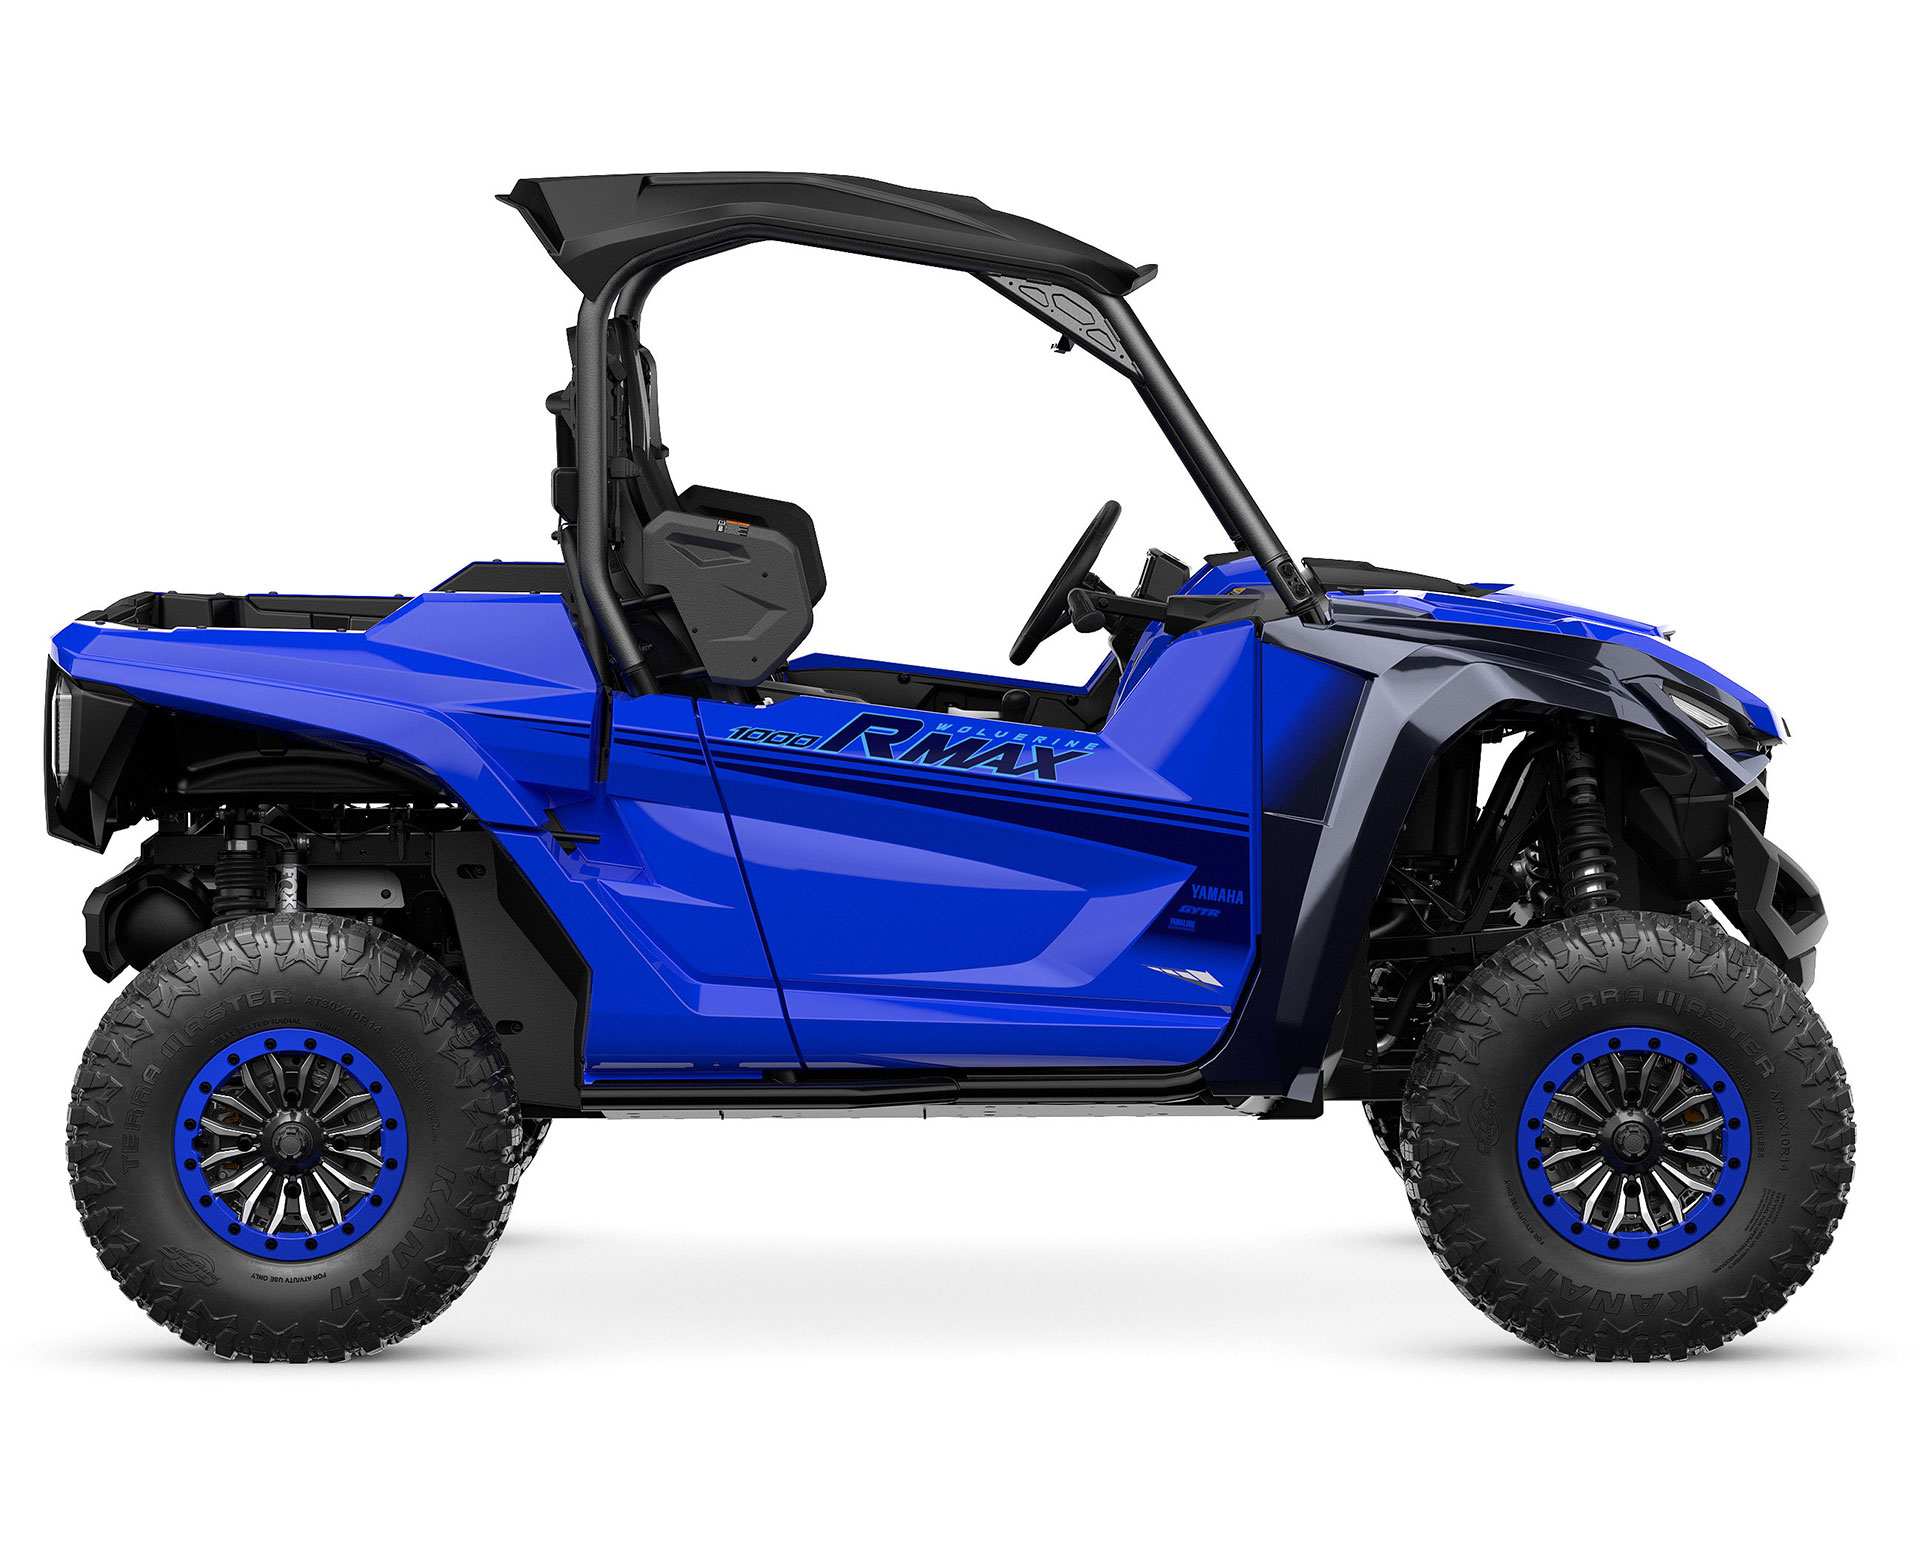 Thumbnail of your customized 2024 WOLVERINE® RMAX2™ 1000 Sport